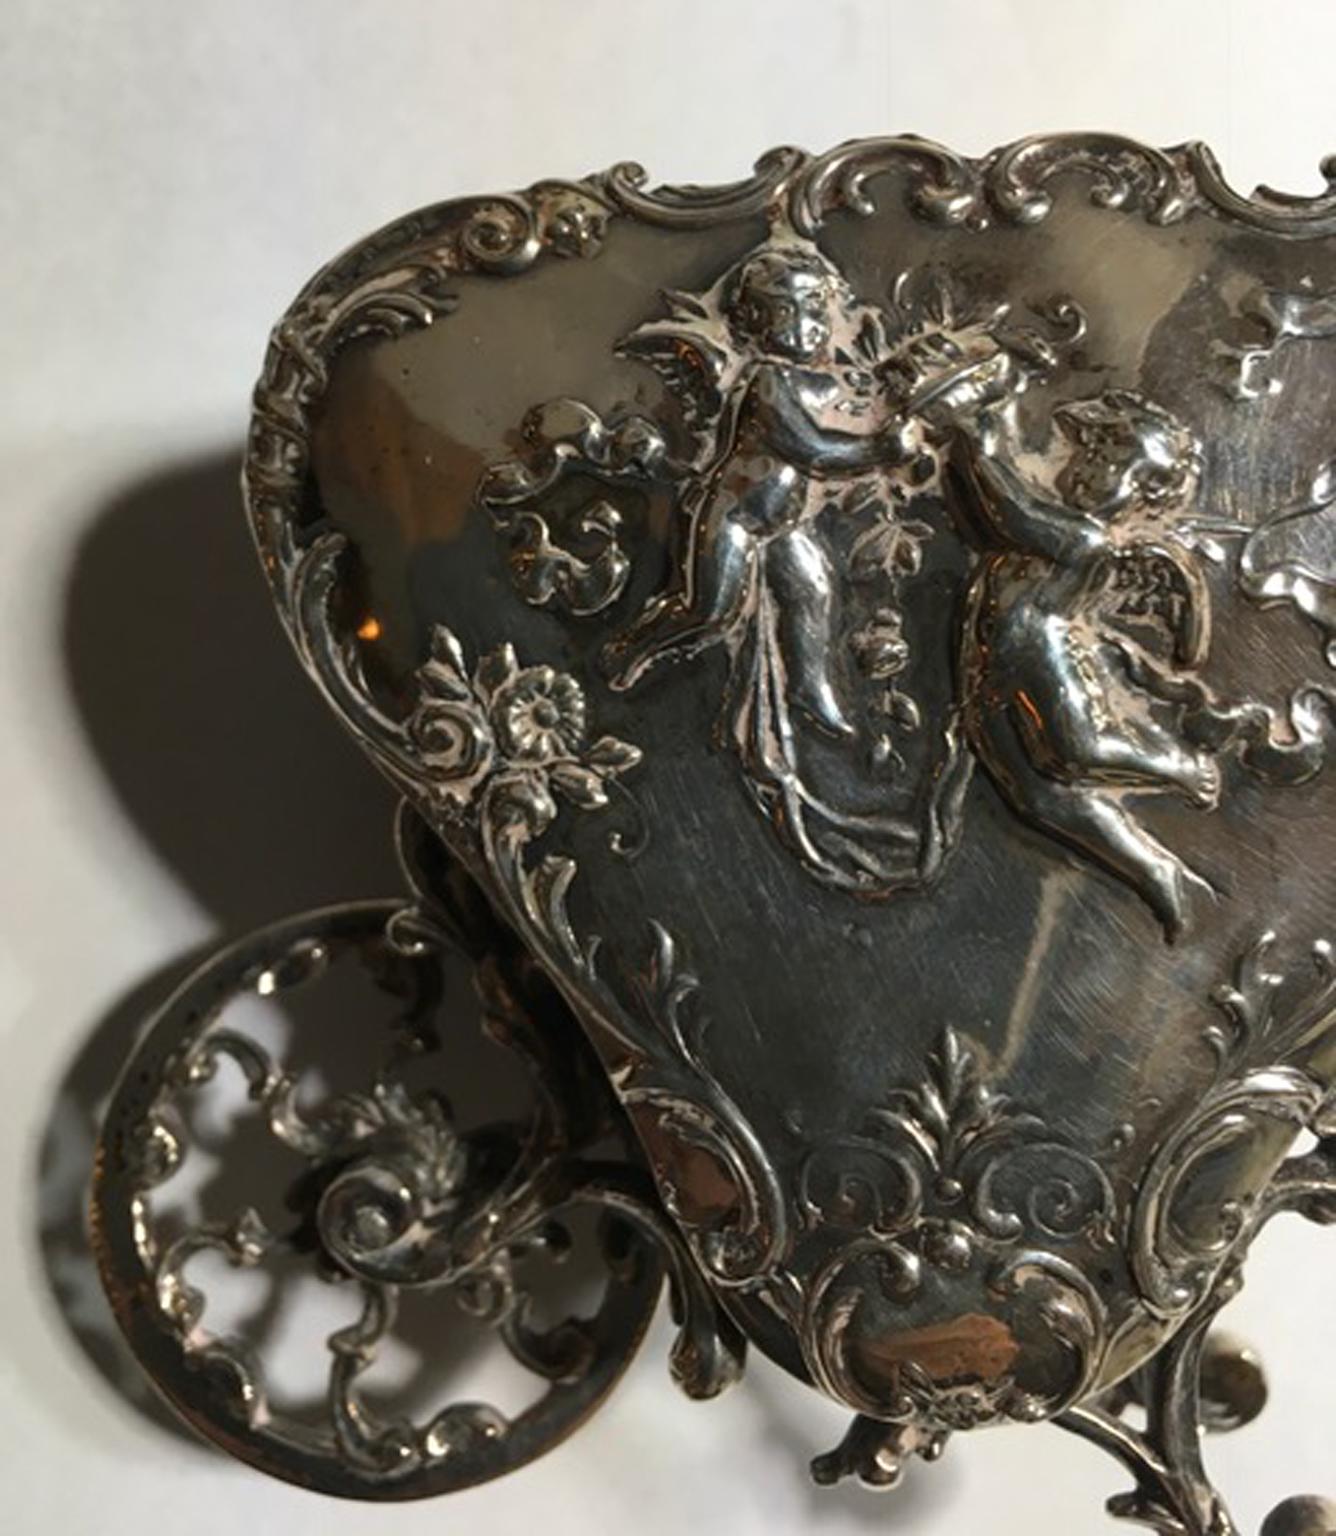 Antique baroque sterling silver little love cart  late 19th Century, Italy.

This a very nice and lovable piece of art fine art jewellery. Totally hand made. The surface is finely carved with floral decor and little angels.

Silver marks on the